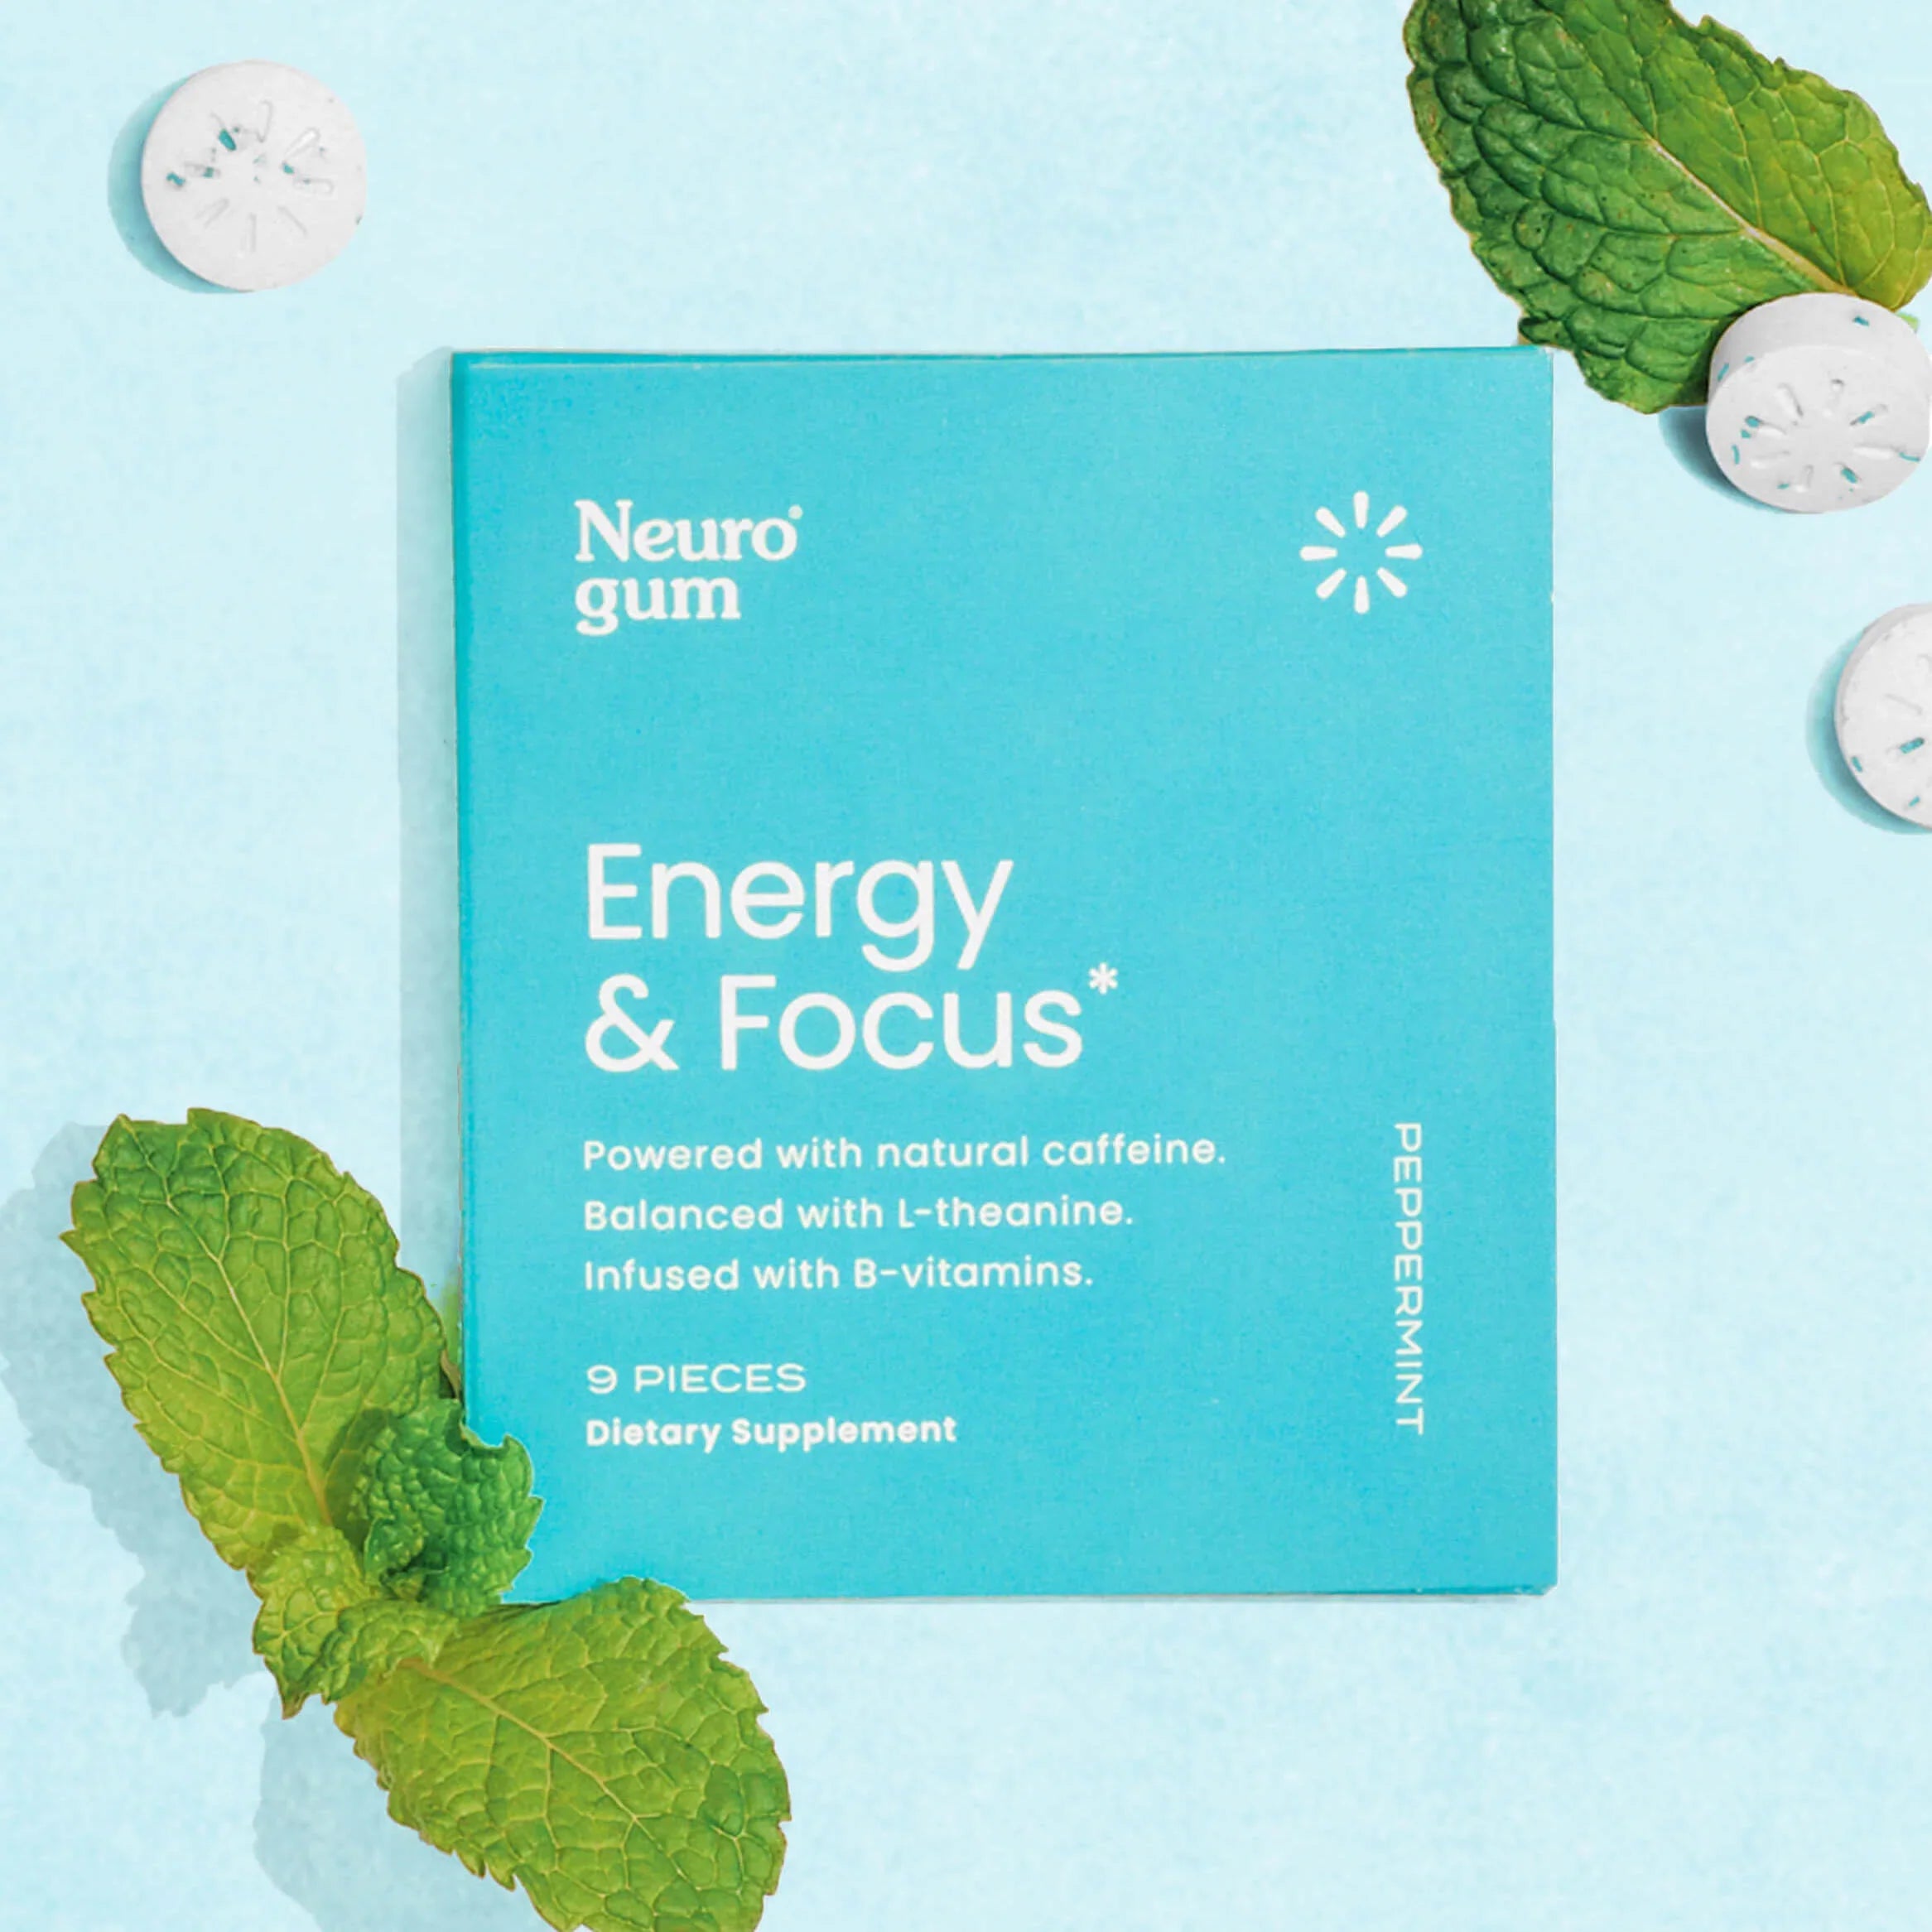 Energy & Focus Gum on blue background surrounded by gum tablets and mint leaves.